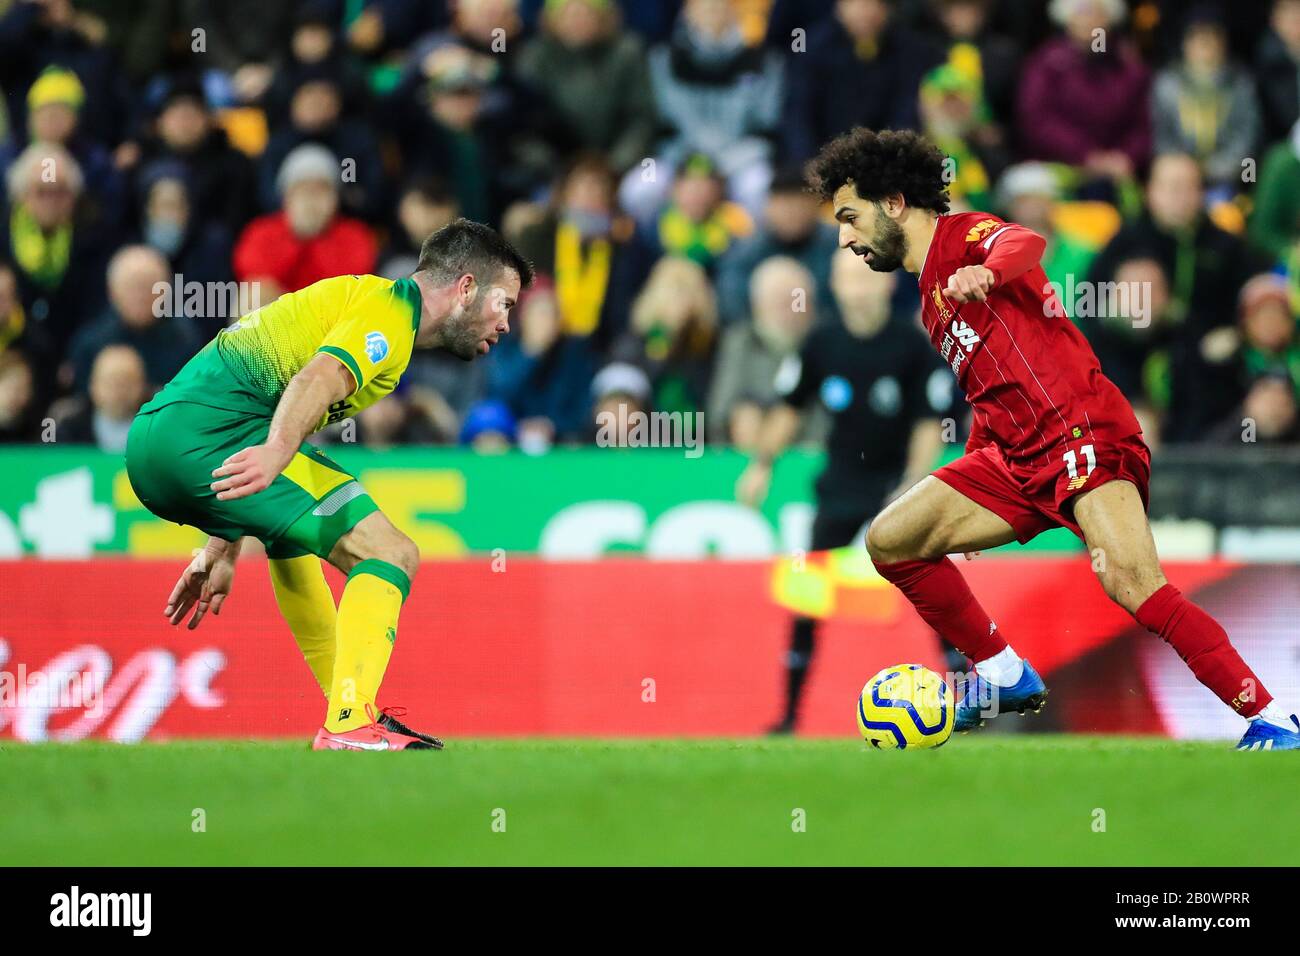 15th February 2020, Carrow Road, Norwich, England; Premier League, Norwich City v Liverpool : Mohamed Salah (11) of Liverpool tries to find a way passed Grant Hanley (05) of Norwich City Stock Photo